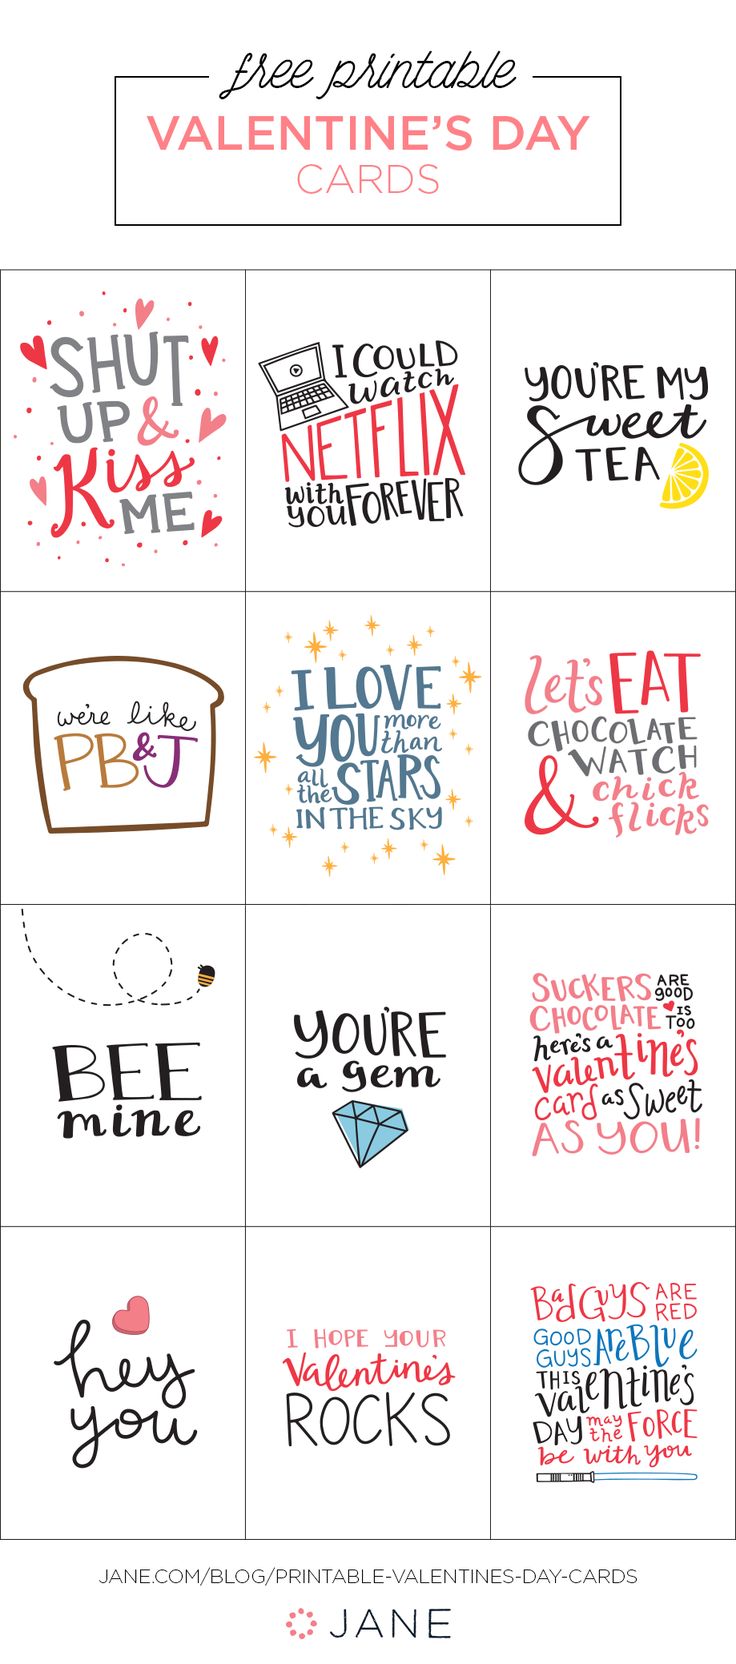 Printable Valentine's Day Cards from Jane.com